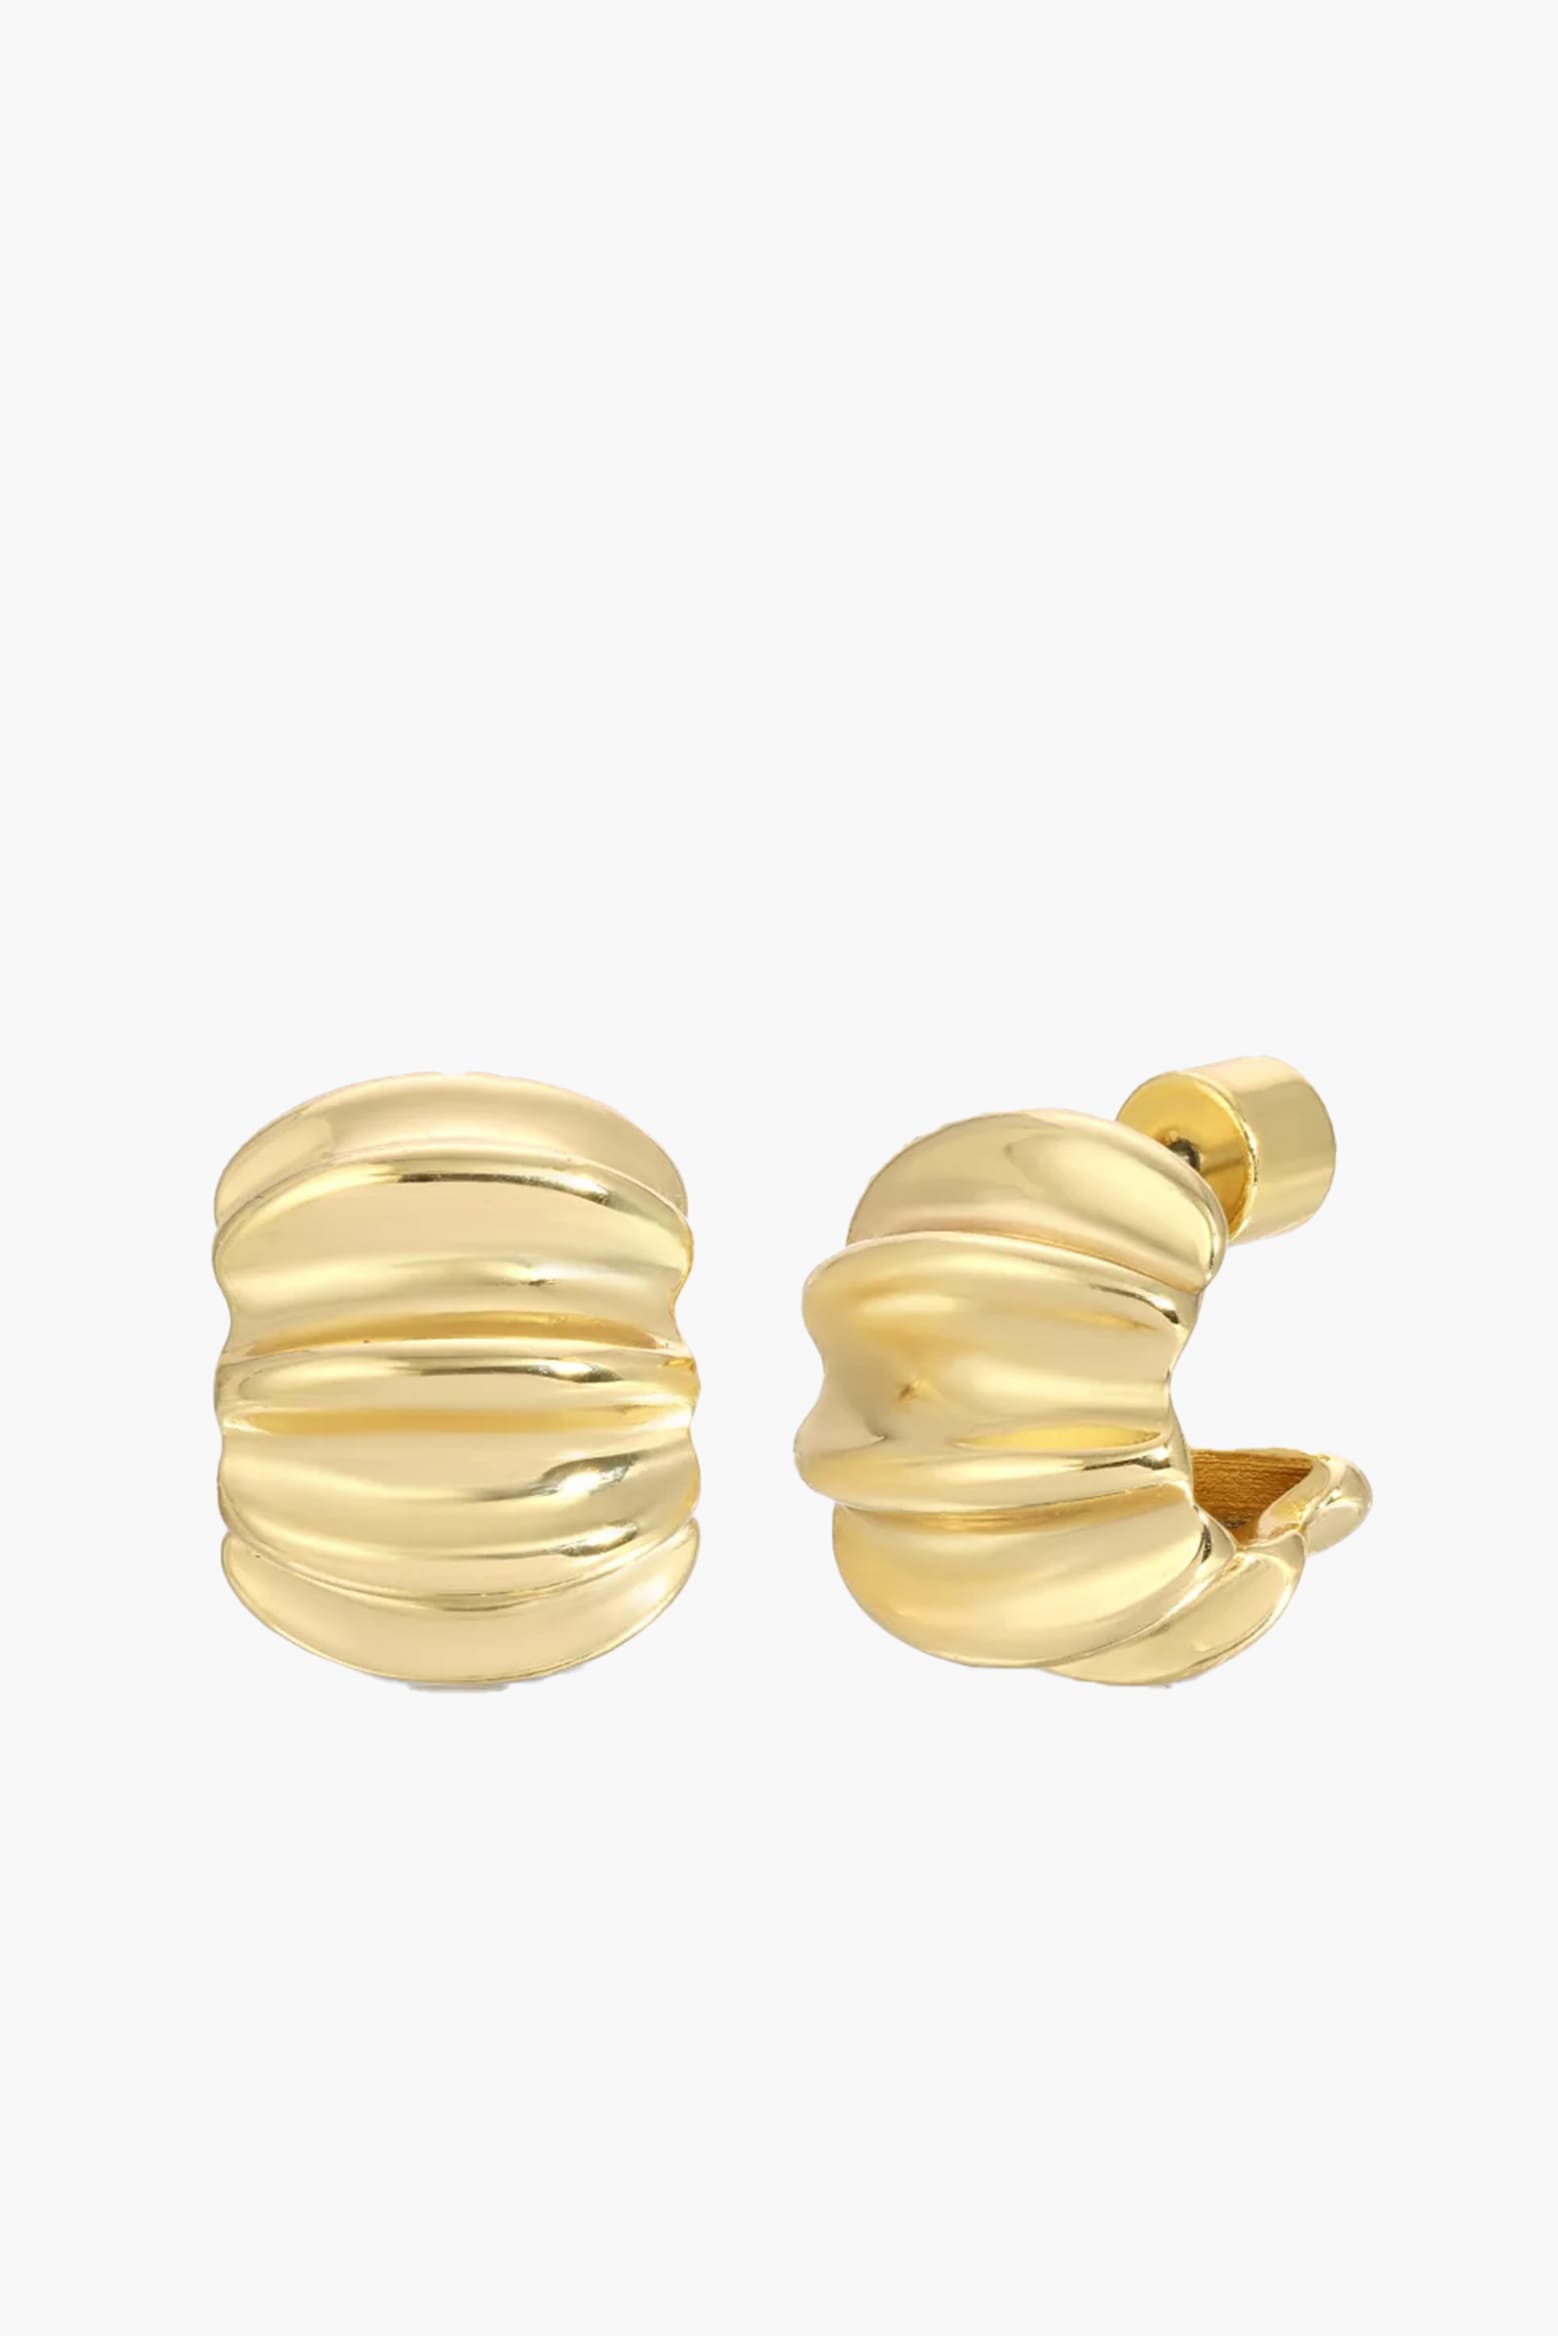 ÉCLATANT Ophelia Hoop in Gold available at The New Trend Australia.